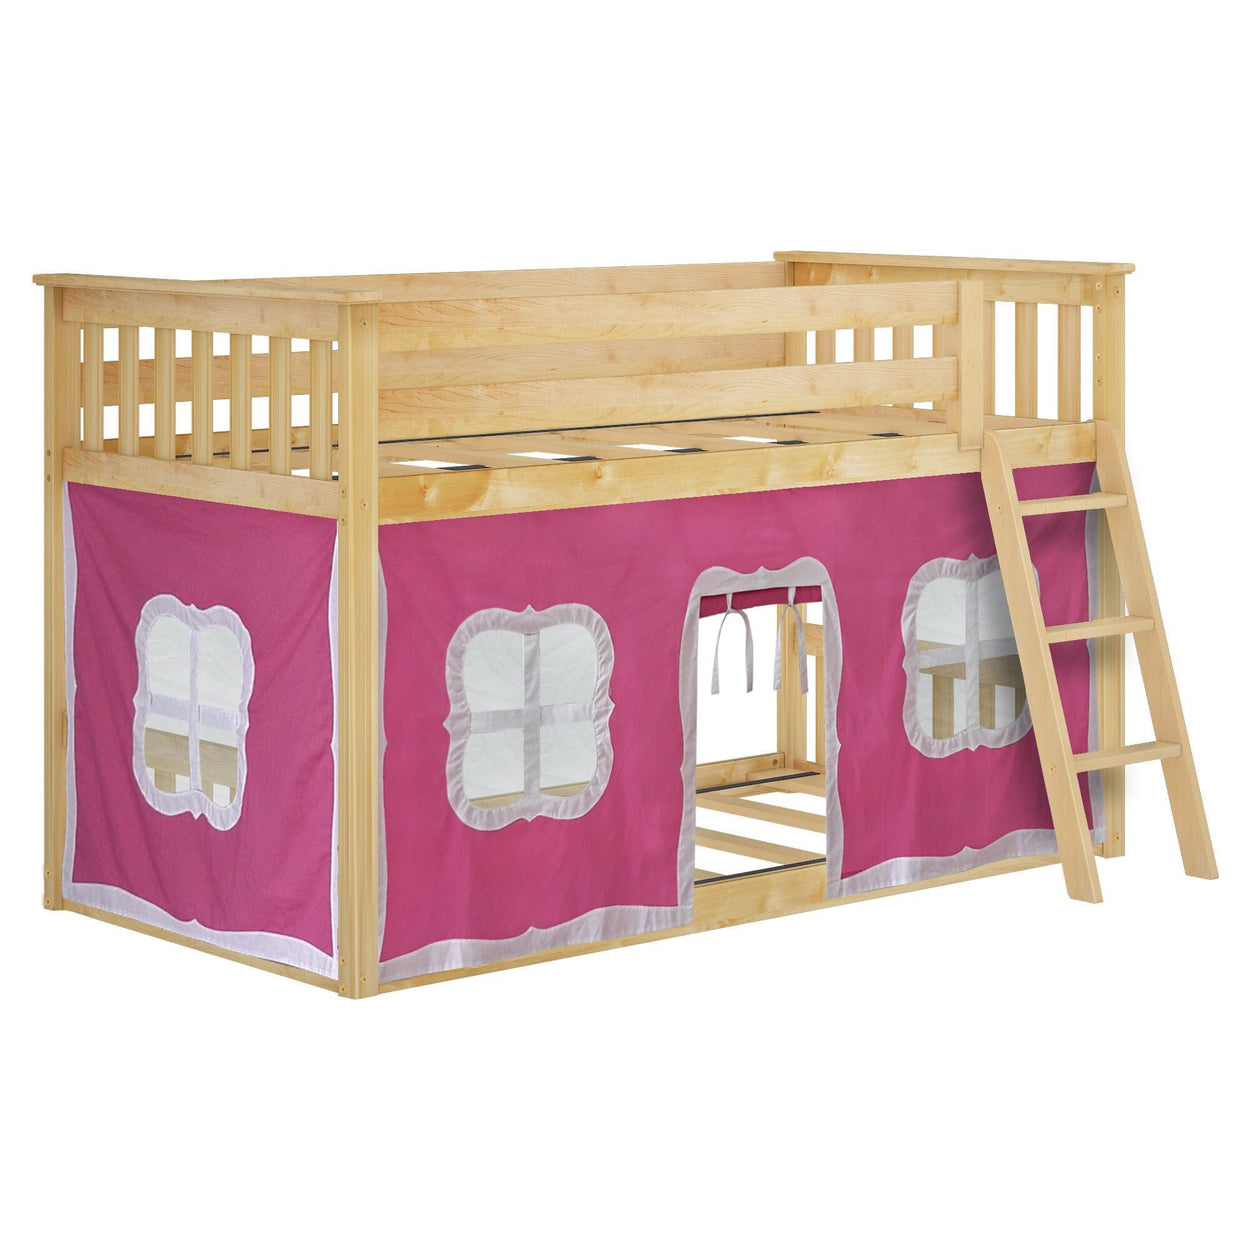 180214001078 : Bunk Beds Twin-Size Low Bunk Bed With Curtain, Natural + Pink